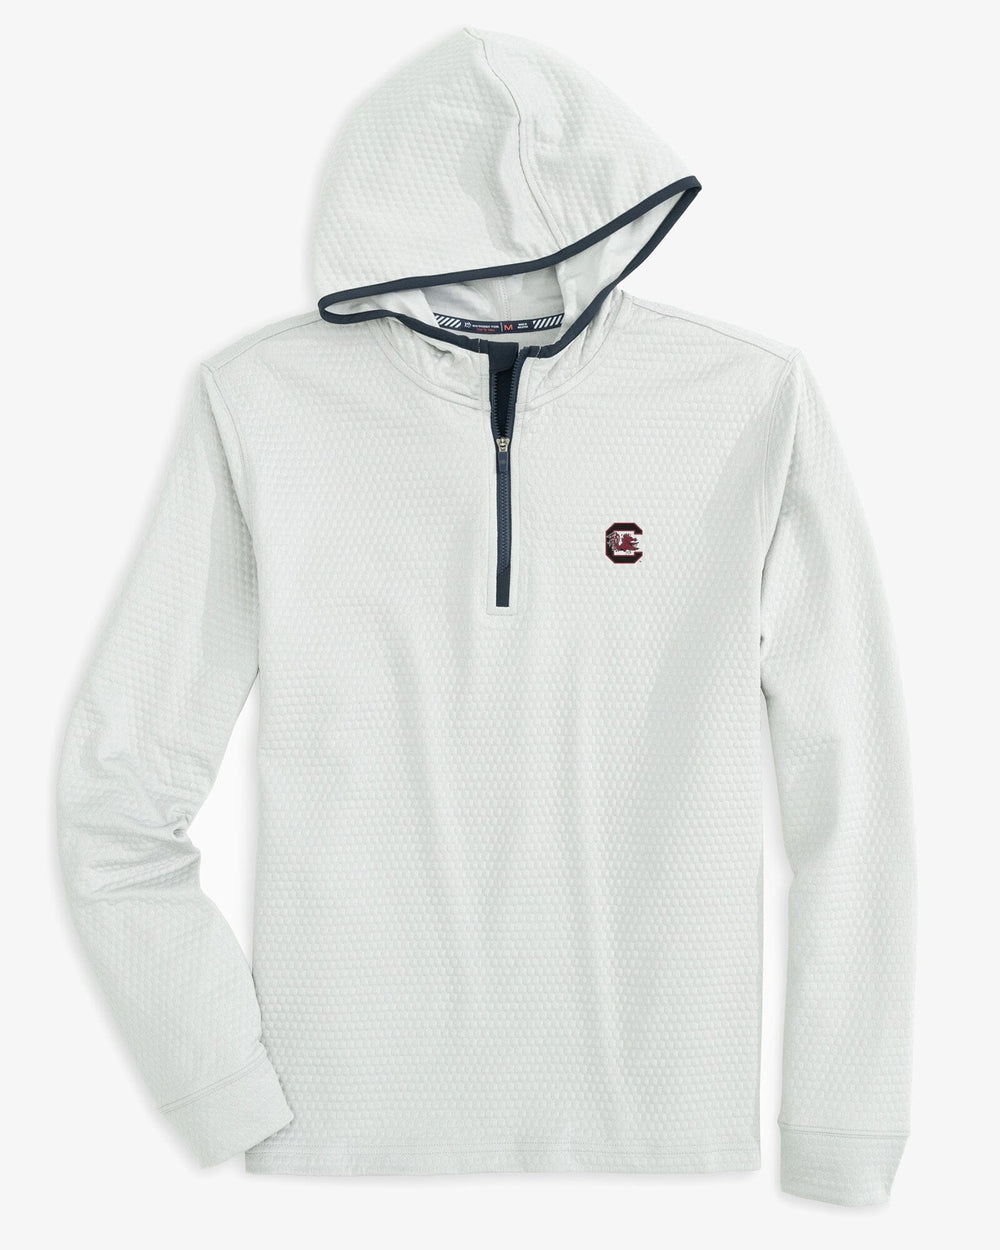 The front view of the South Carolina Gamecocks Scuttle Heather Performance Quarter Zip Hoodie by Southern Tide - Heather Slate Grey